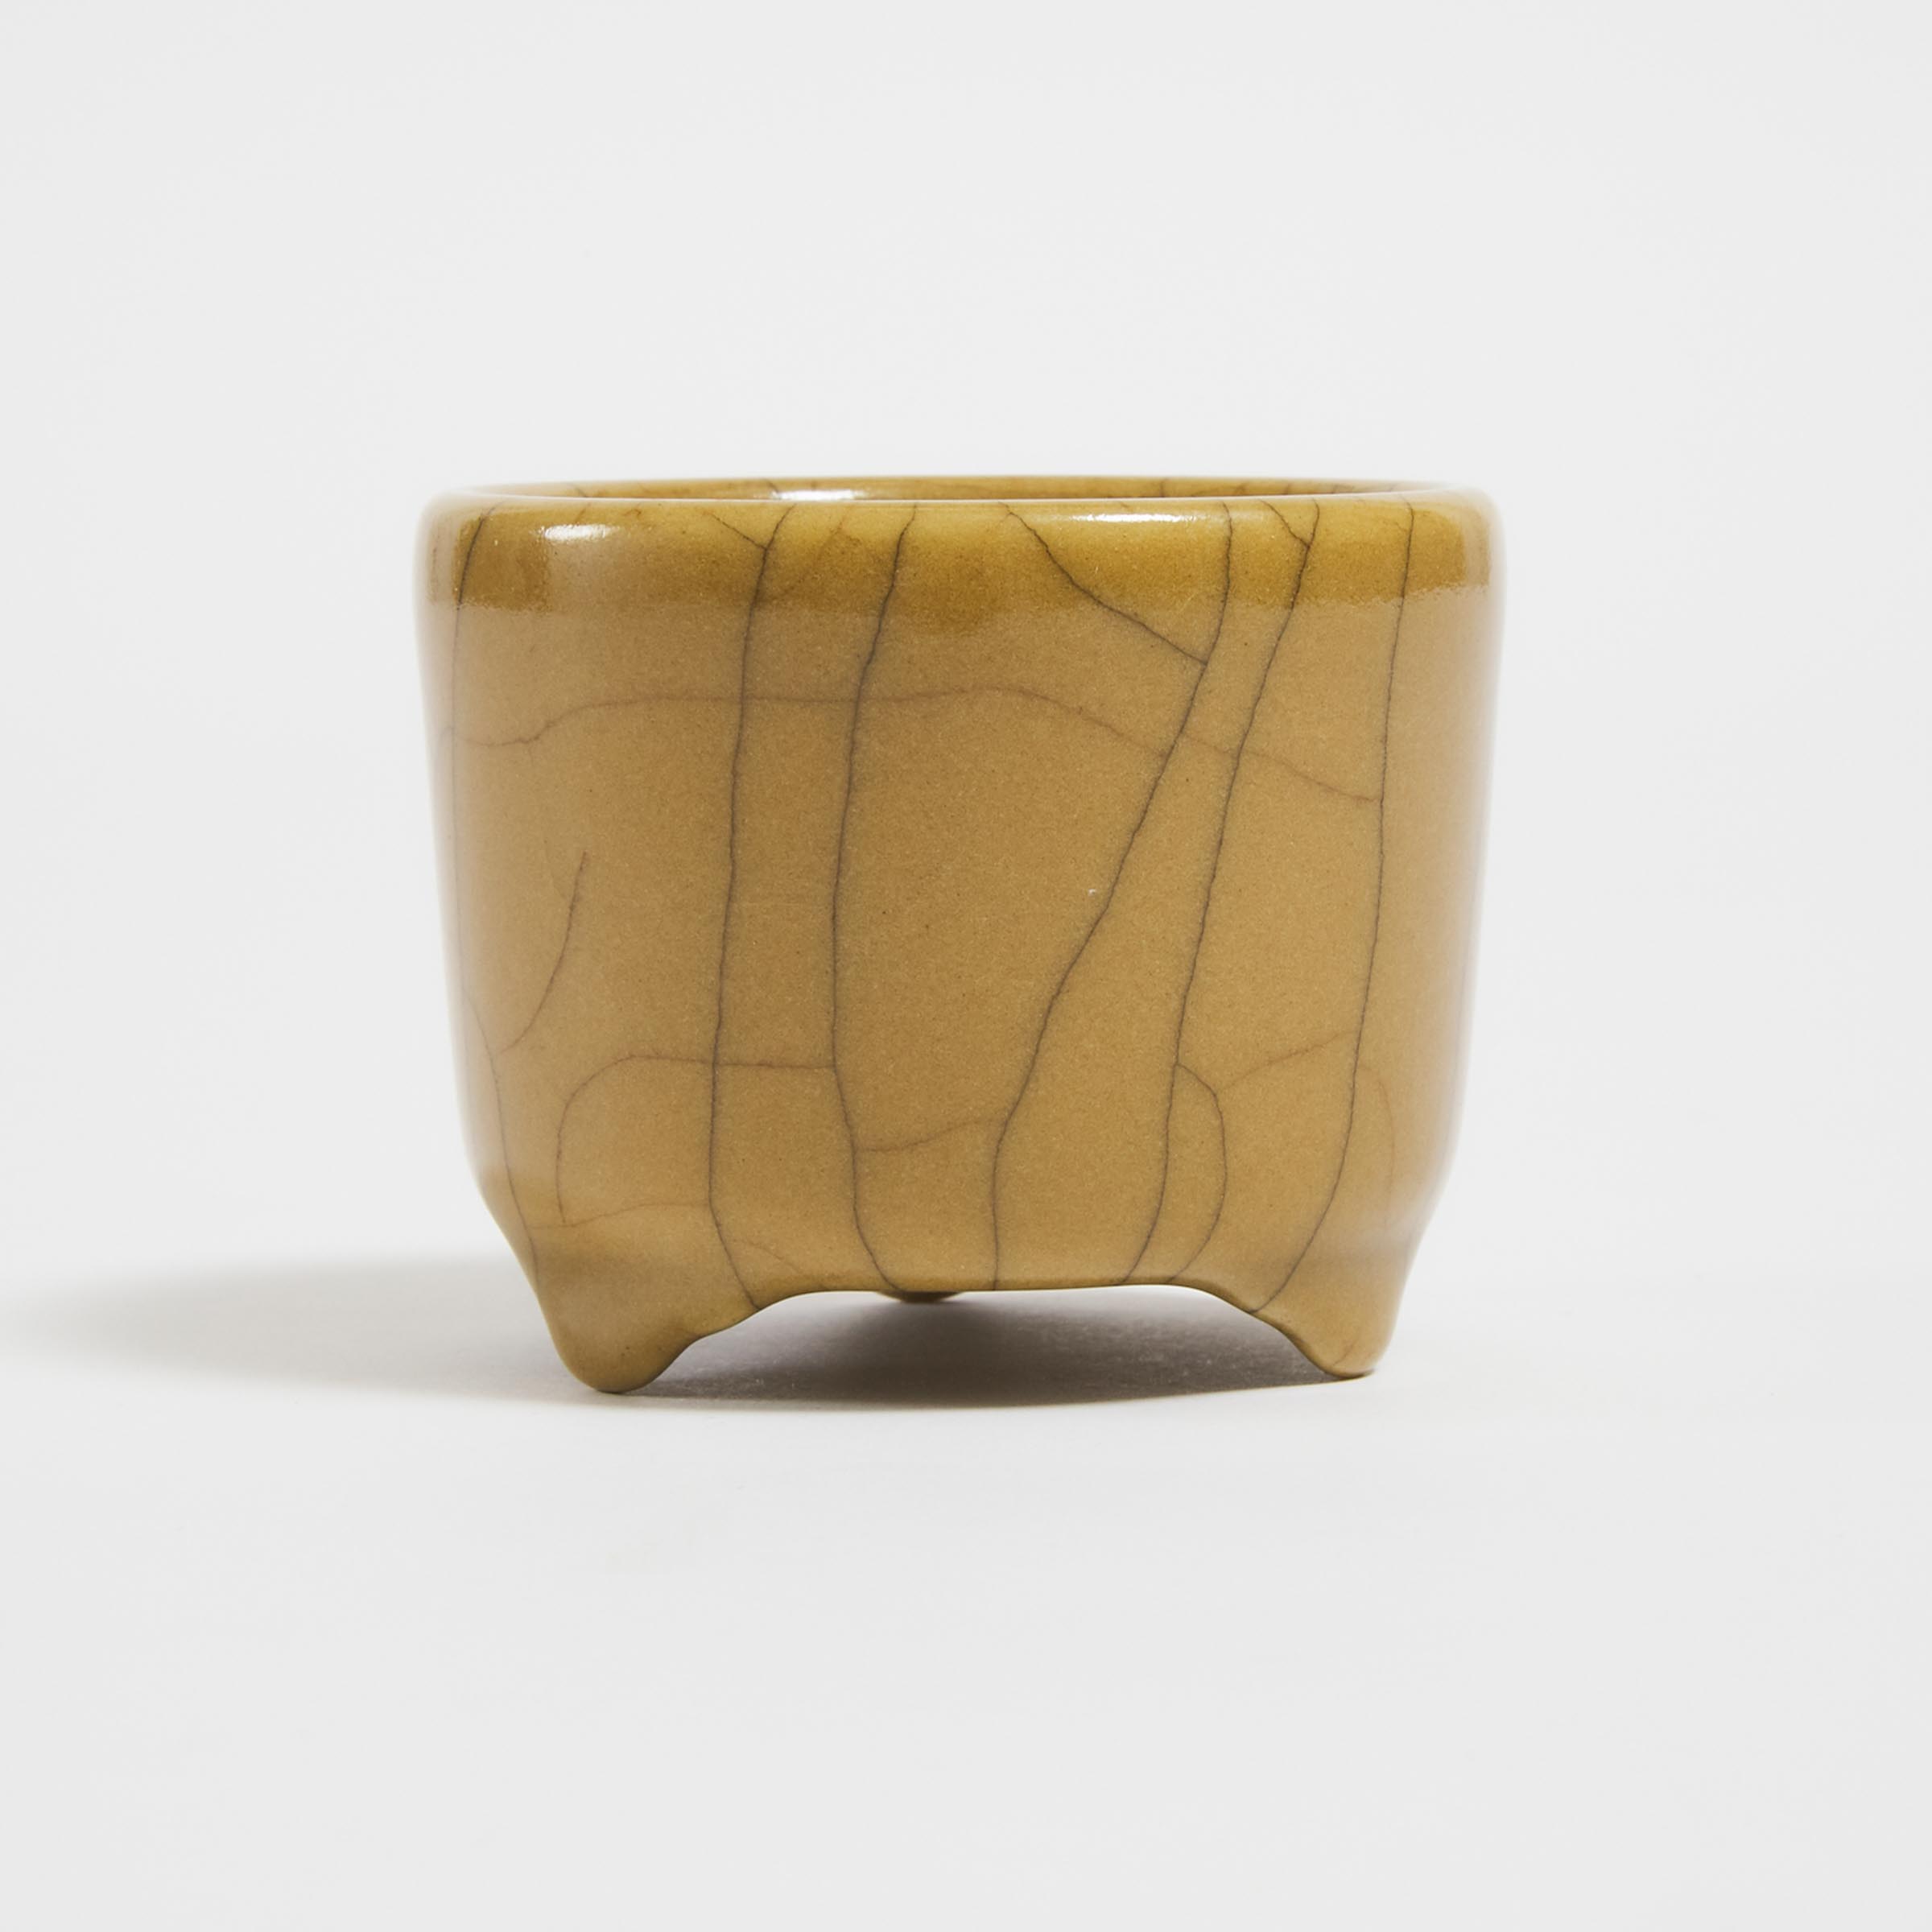 A Small Guan-Type Crackle-Glazed Cup